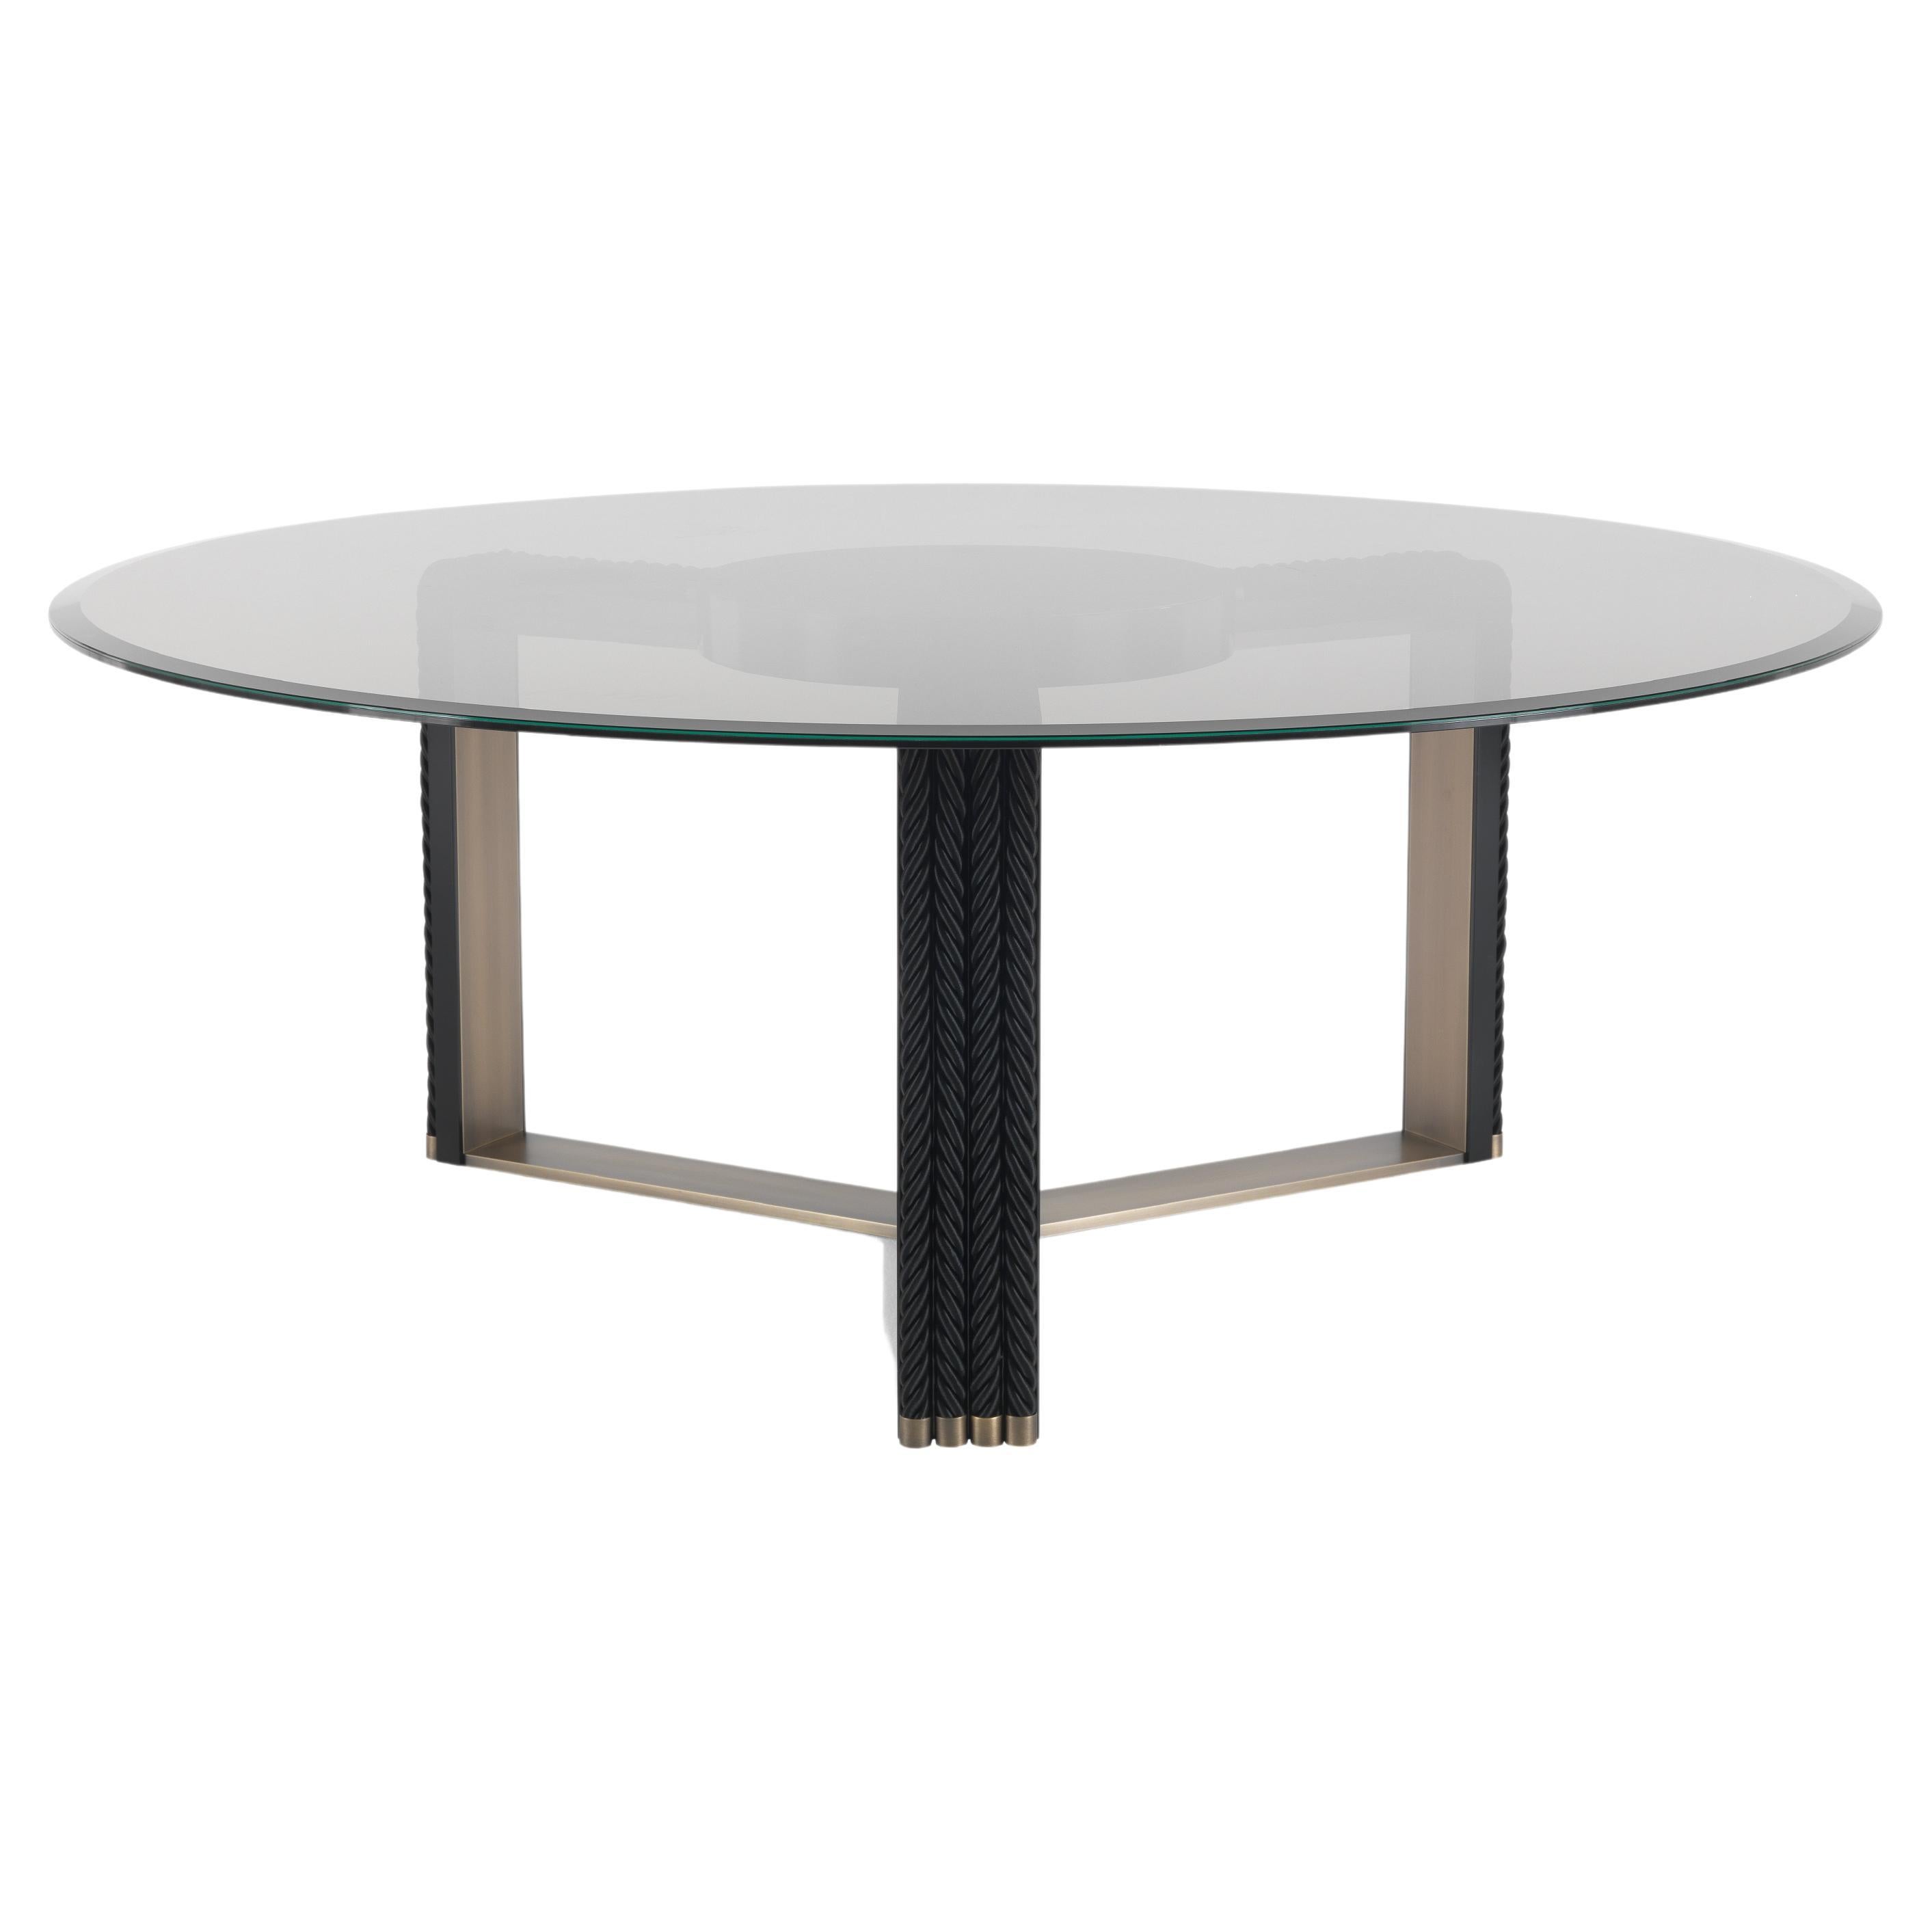 21st Century Glasgow Dining Table with Decorative Ropes by Gianfranco Ferré Home